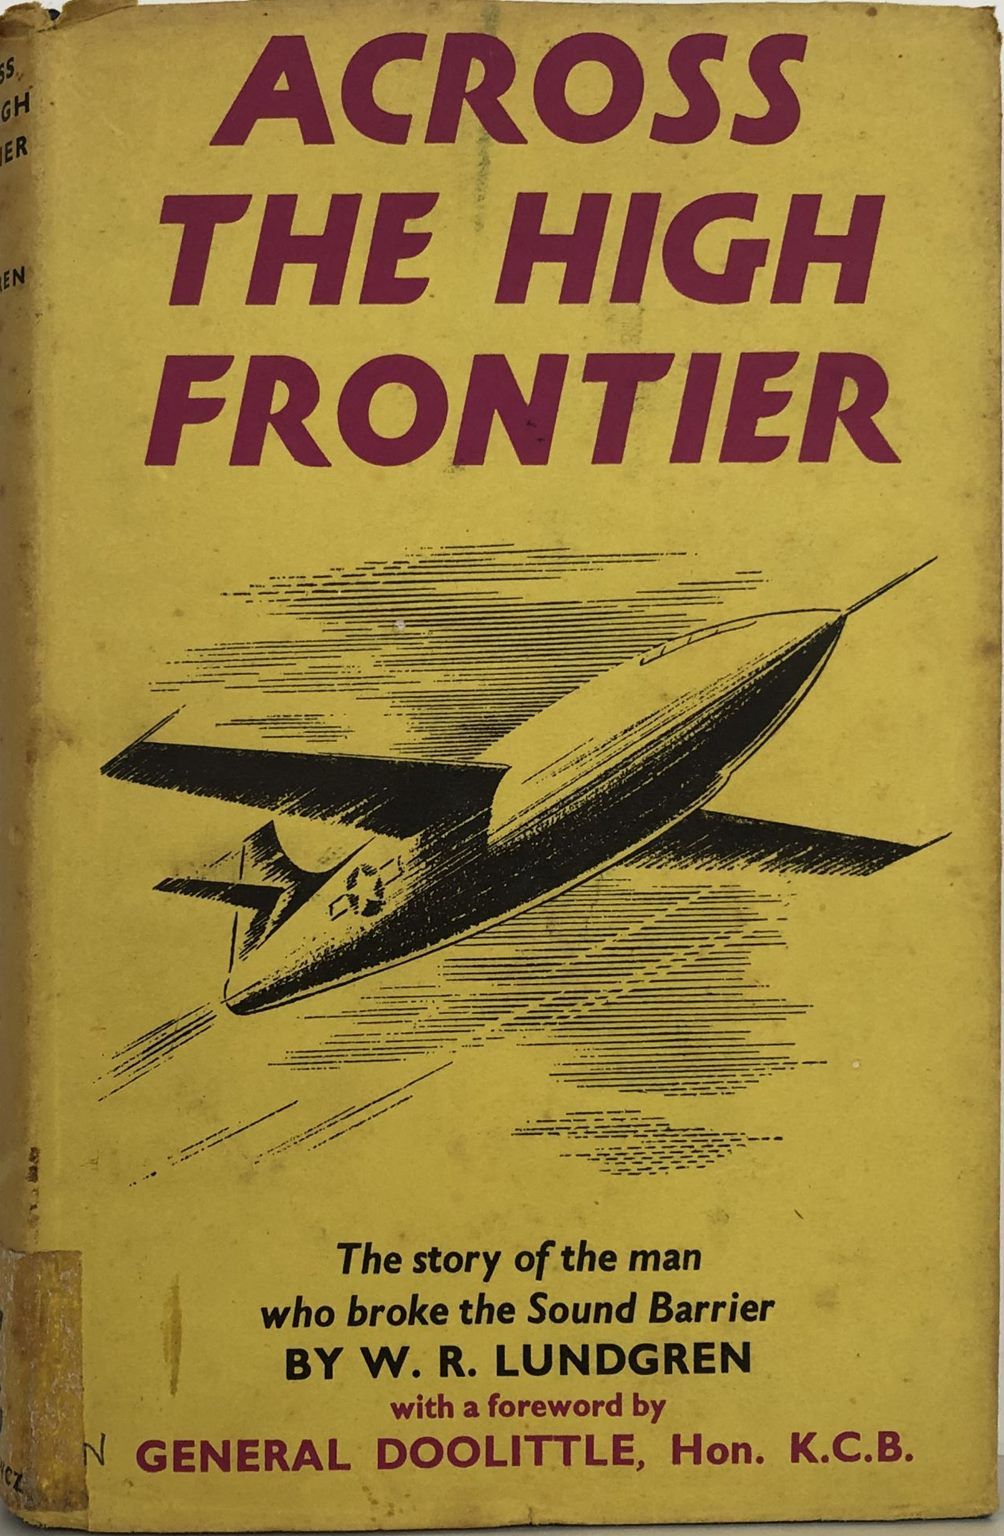 ACROSS THE HIGH FRONTIER: The Story of the man who broke the Sound Barrier